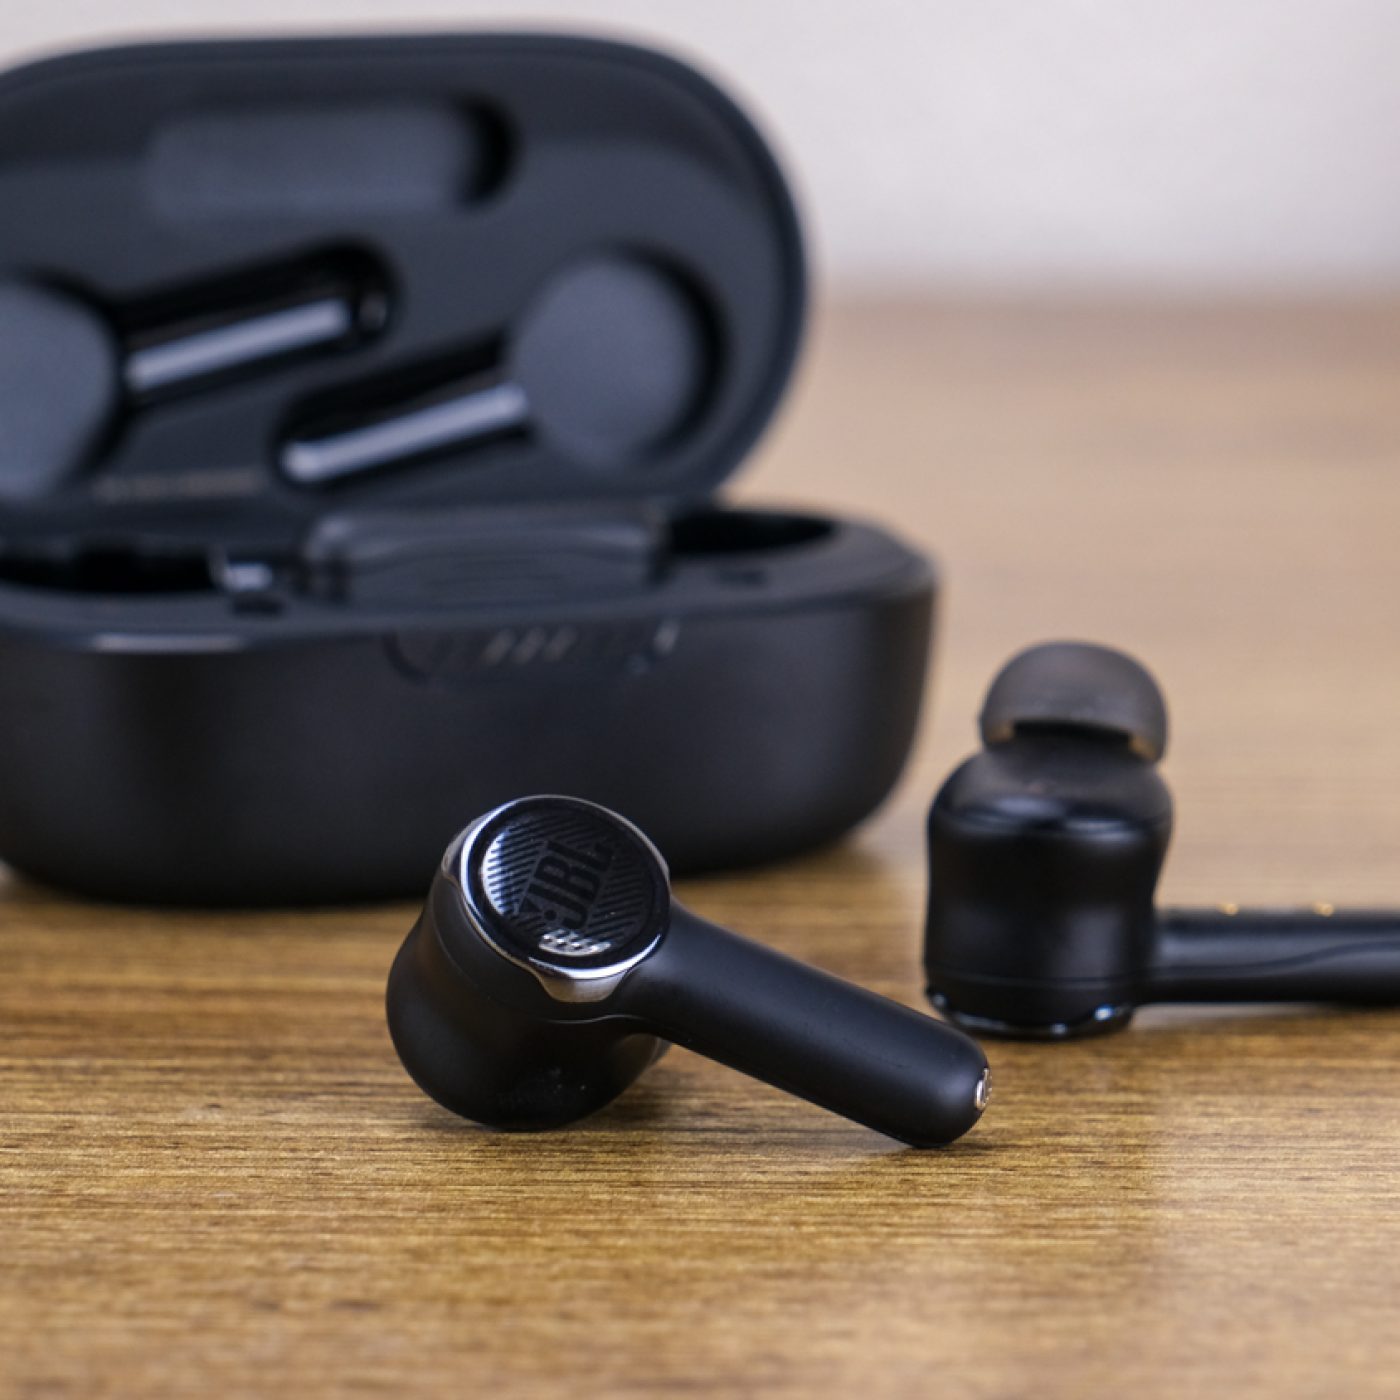 on Great Quantum go wireless gamers for JBL the earbuds earbuds TWS review: